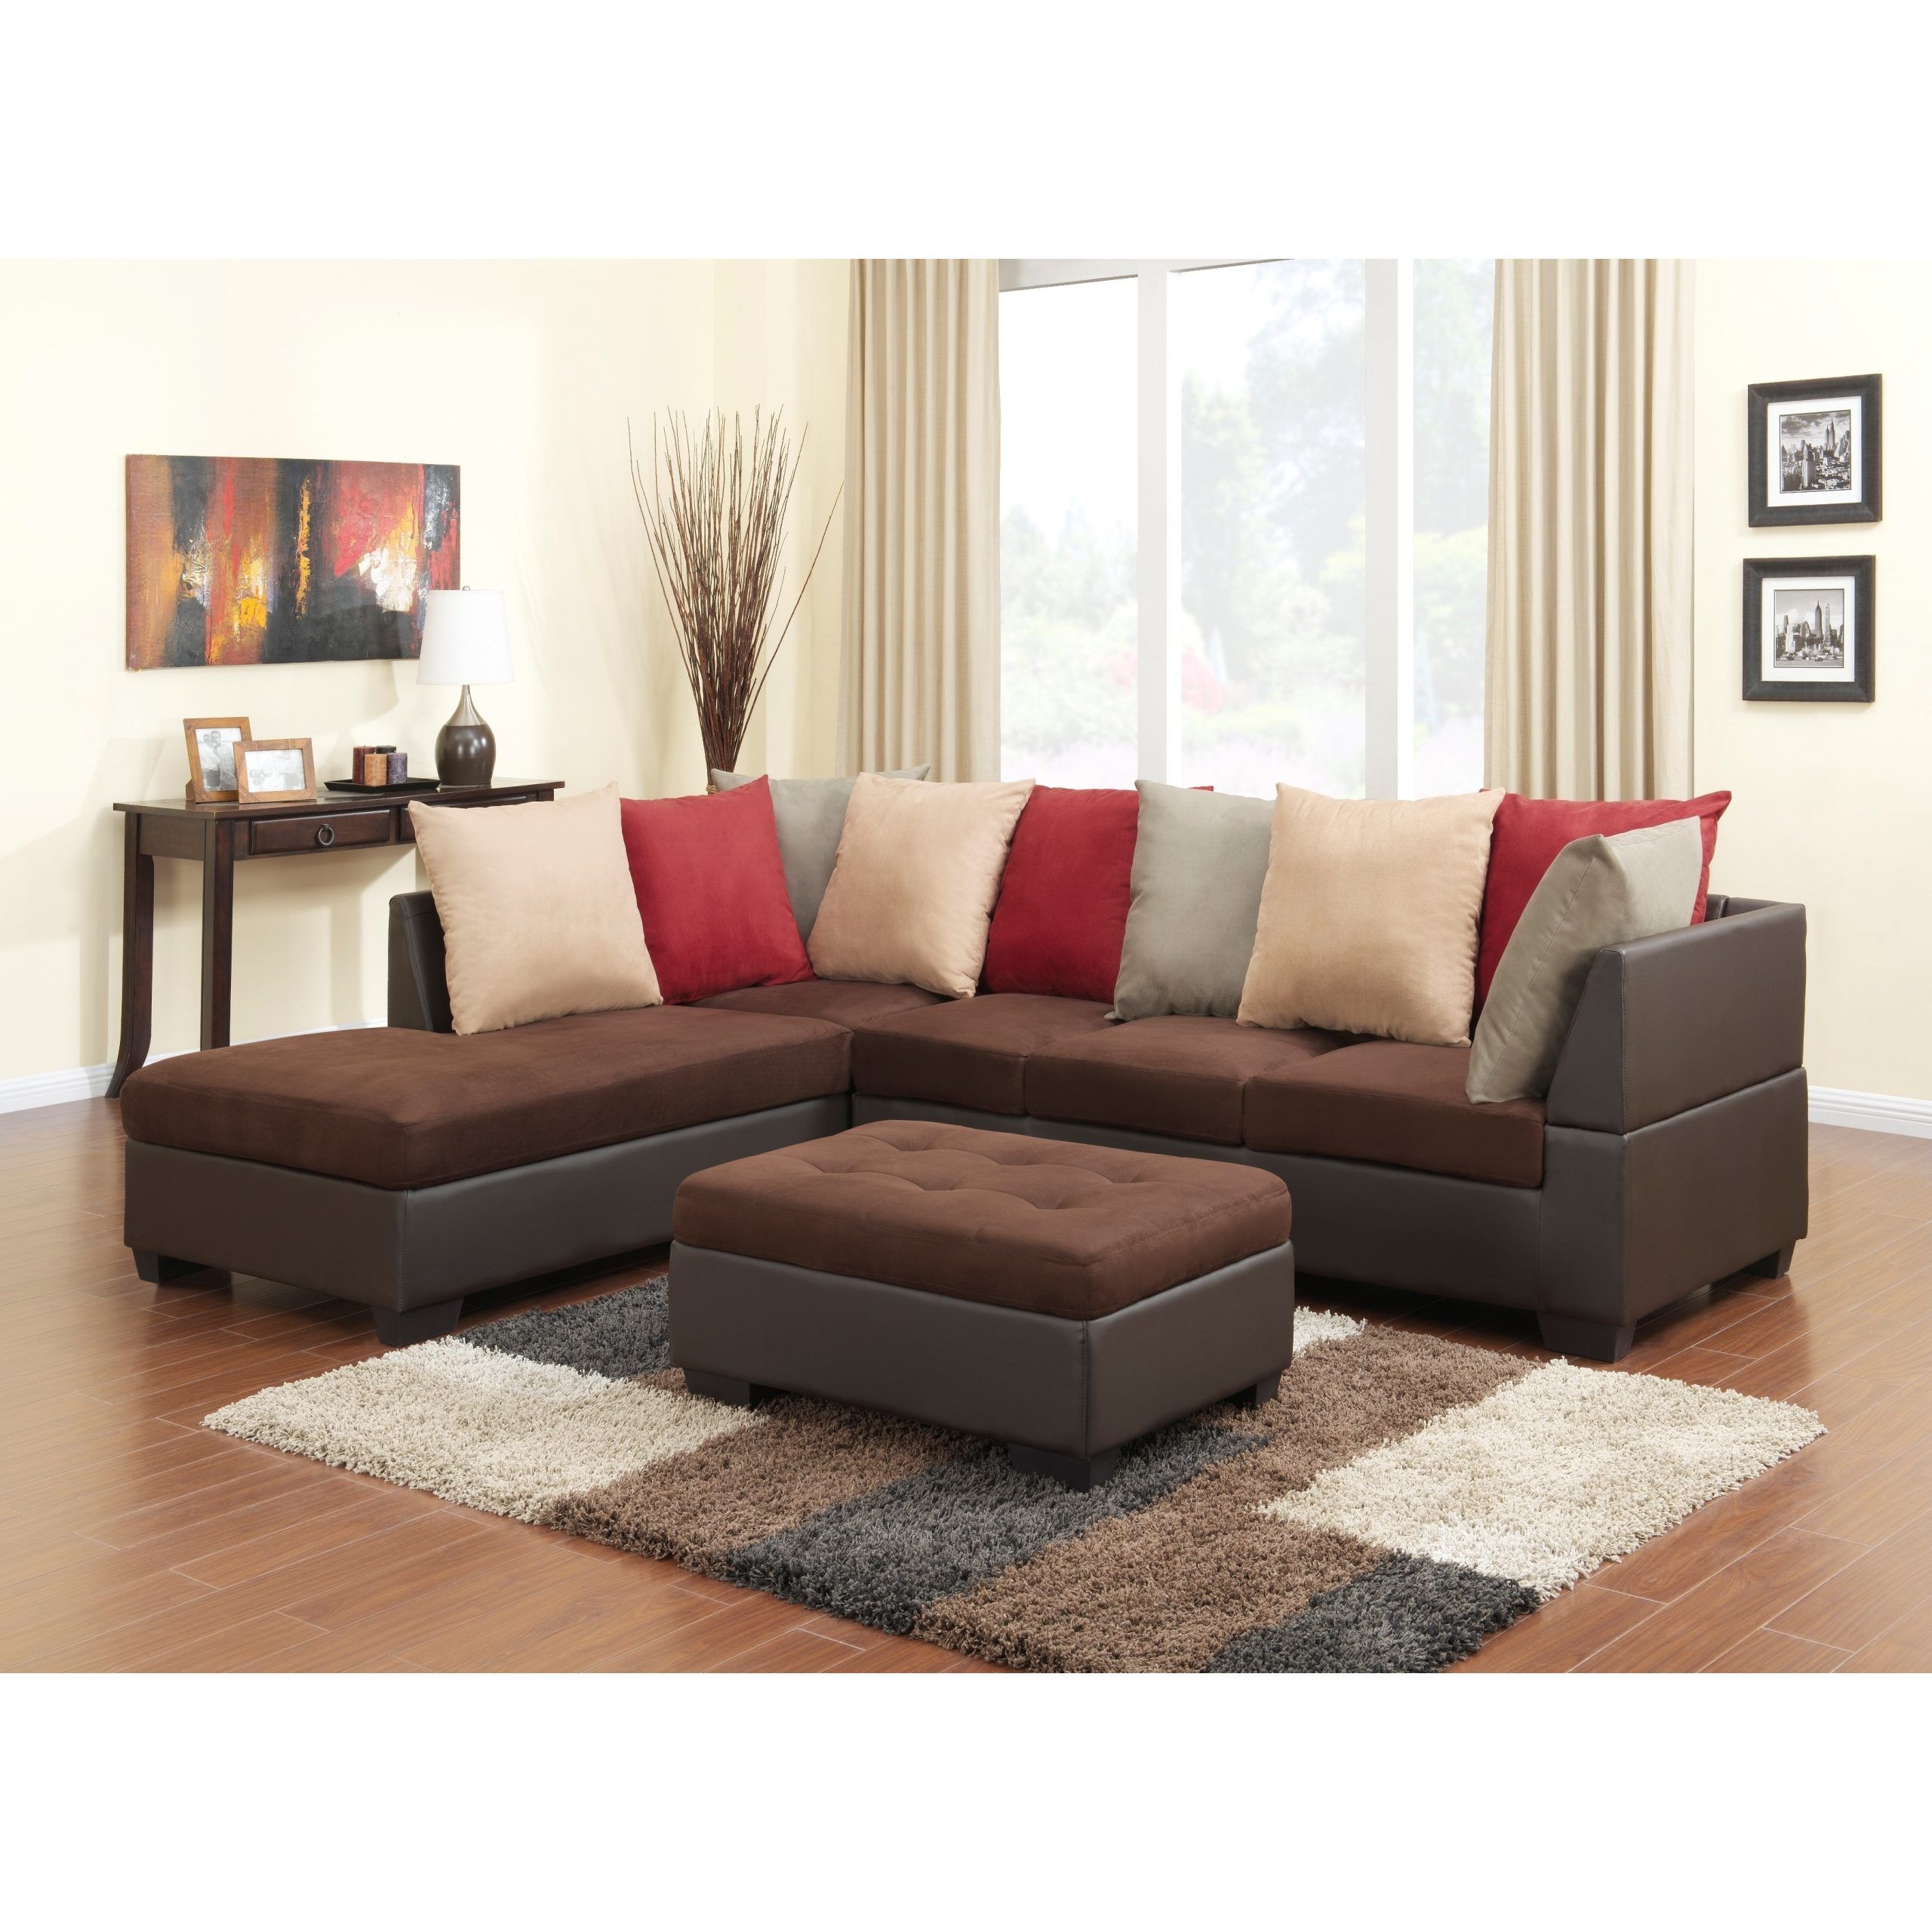 Microfiber Sectional Sofa With Scatter Back Pillows – Overstock Intended For Microfiber Sectional Corner Sofas (Gallery 15 of 20)